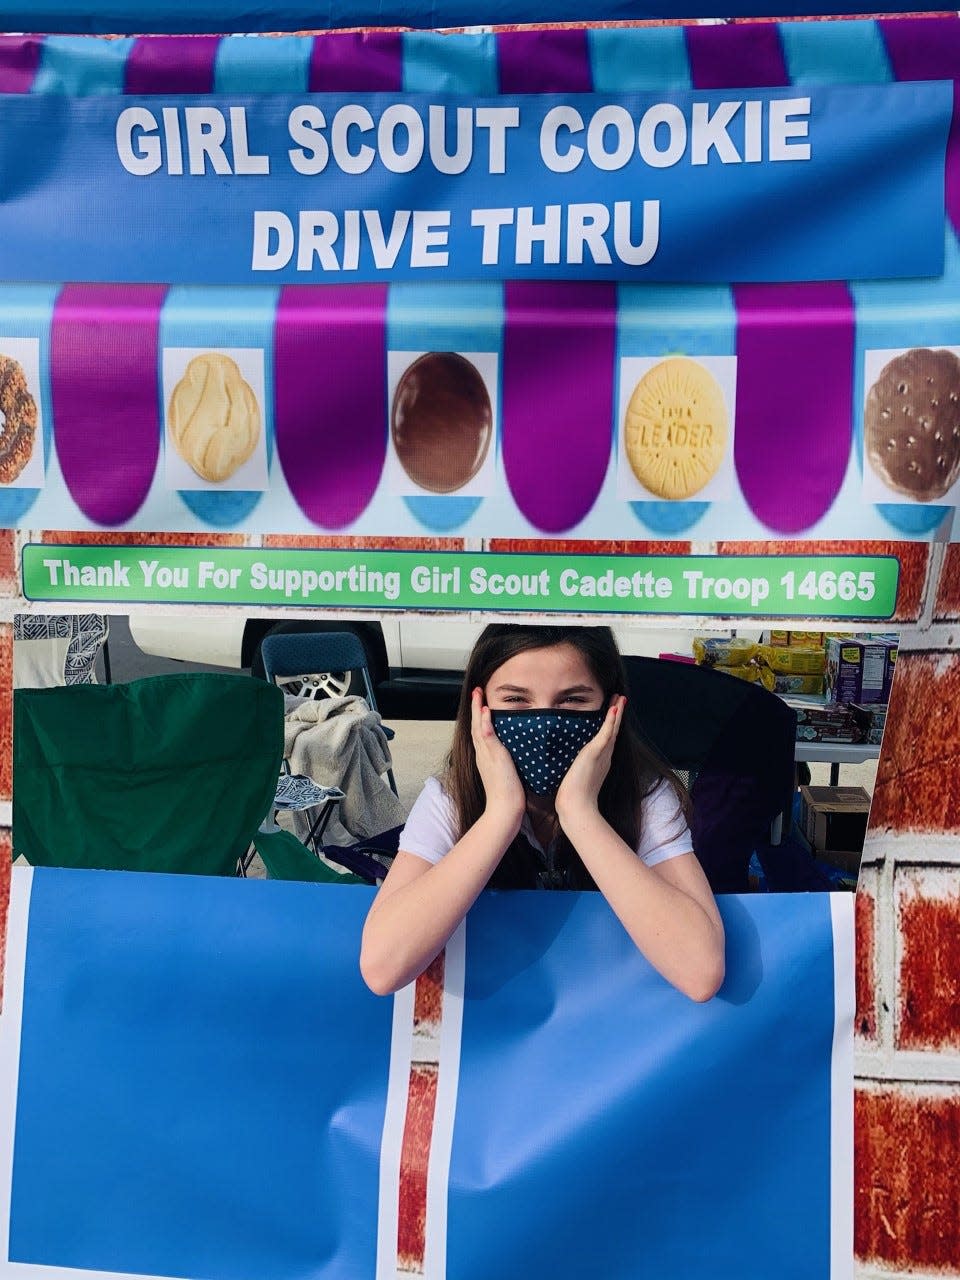 A Girl Scout Cadette of Troop 14665, located in the Atlanta area, awaits customers in their drive-thru cookie stand.